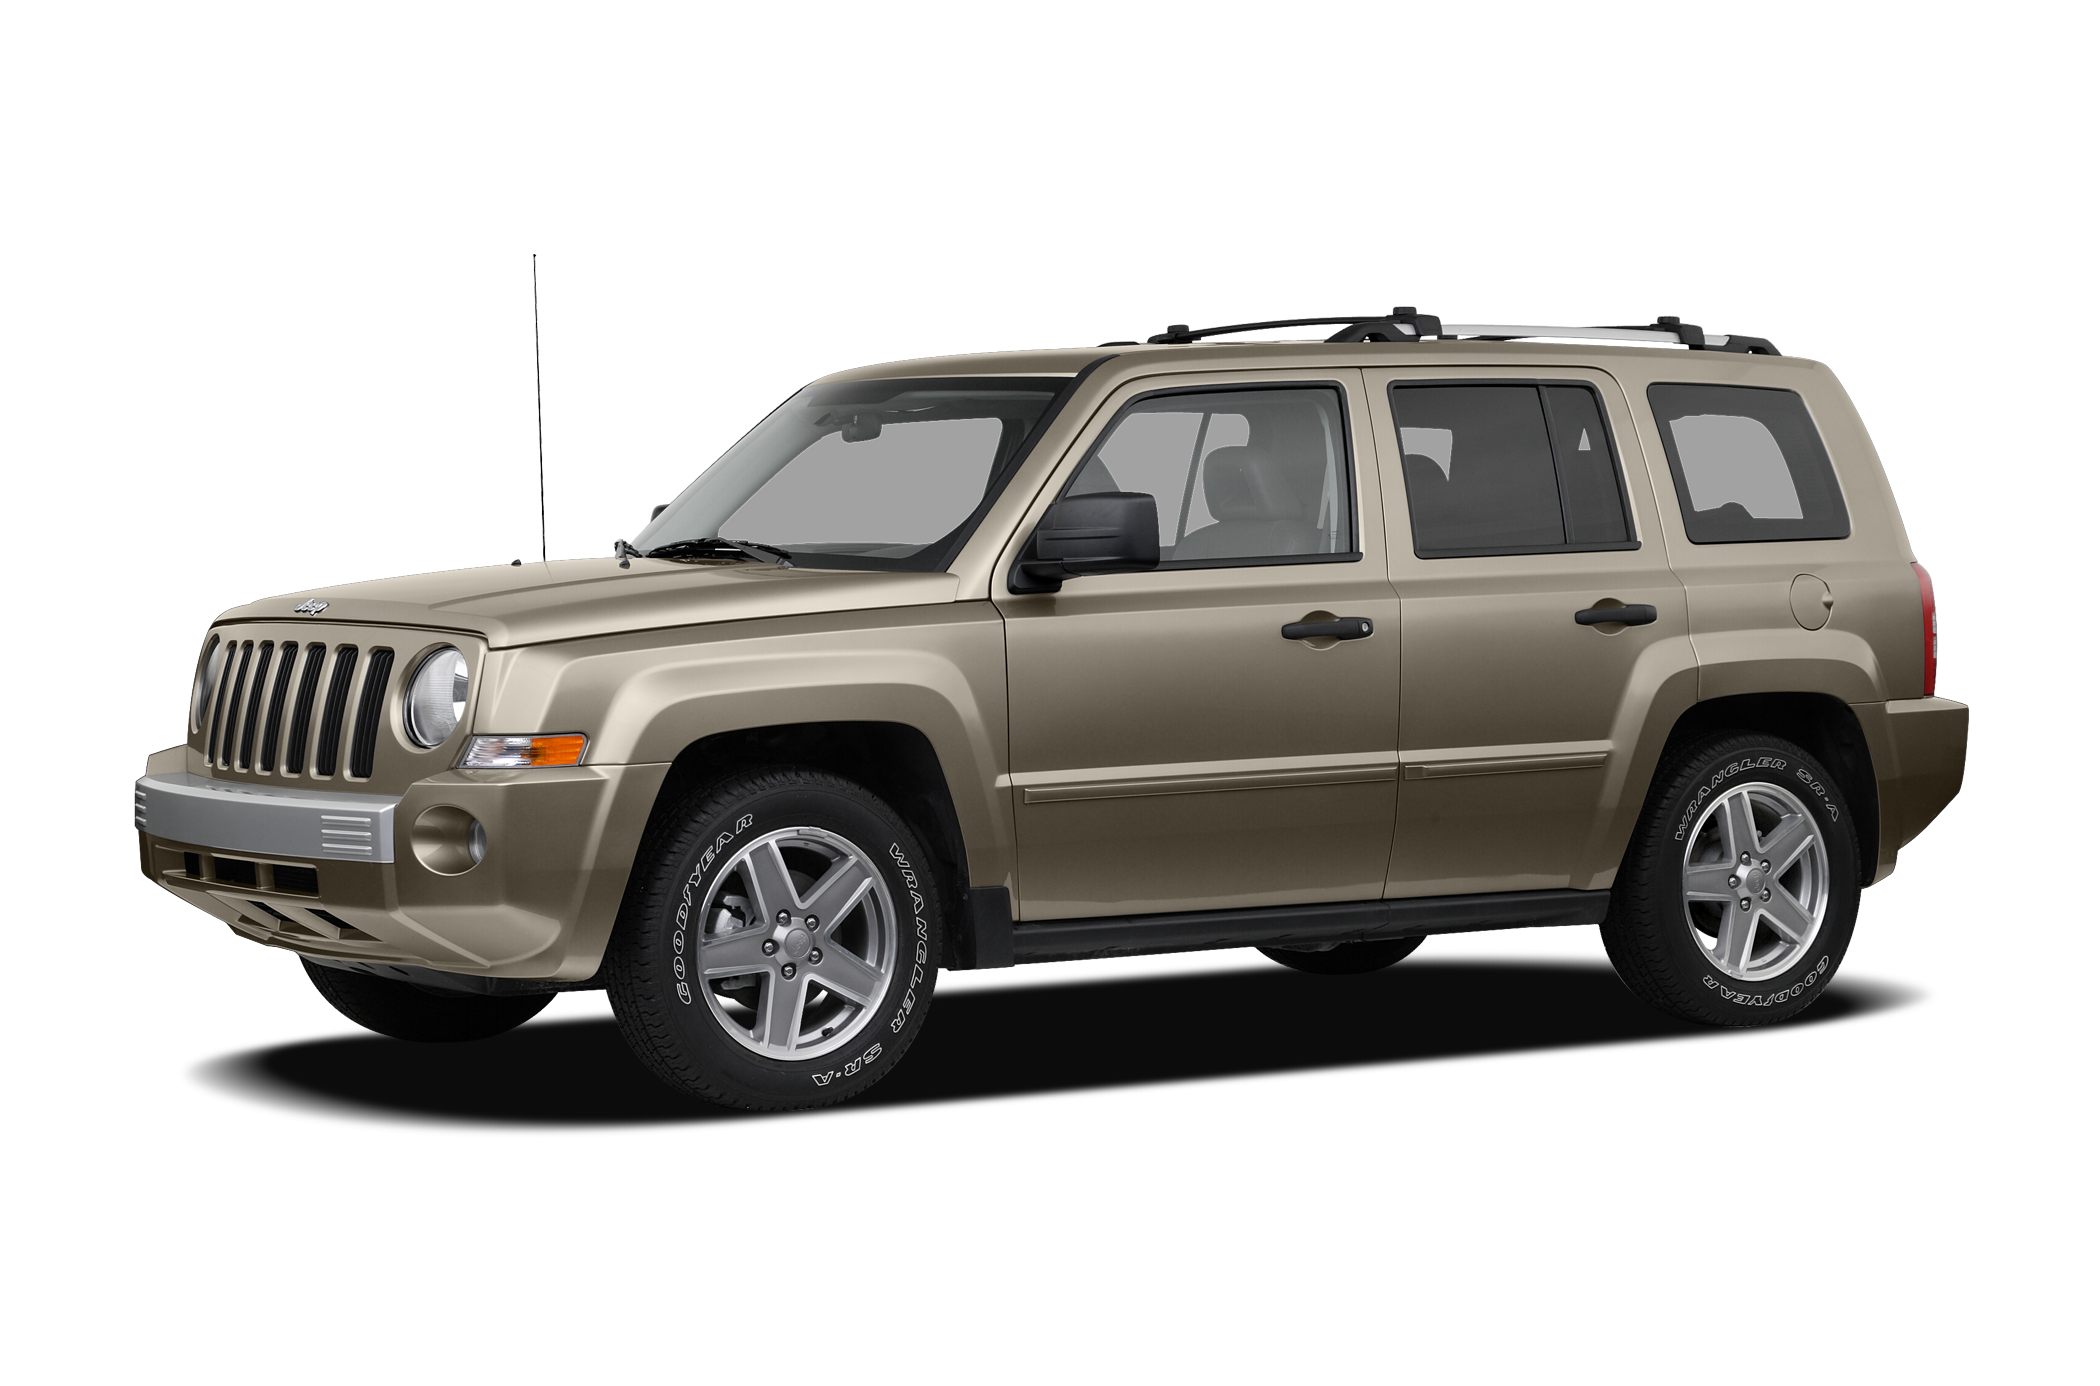 2016 Jeep Patriot Wiring Diagram from s.aolcdn.com